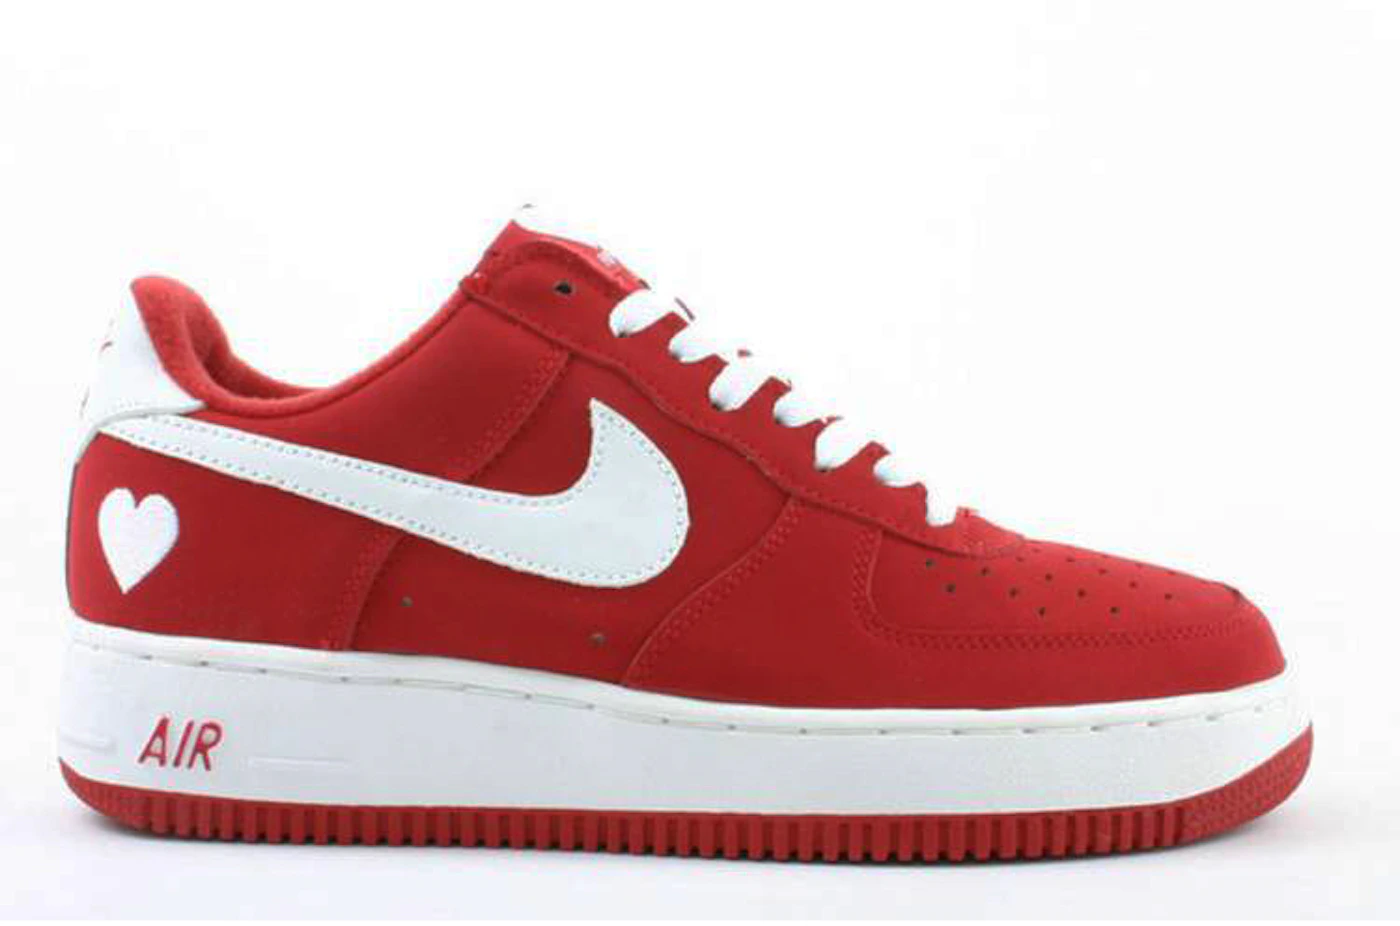 Nike Air Force 1 Low V-Day (Women's) - 624022-611 - US